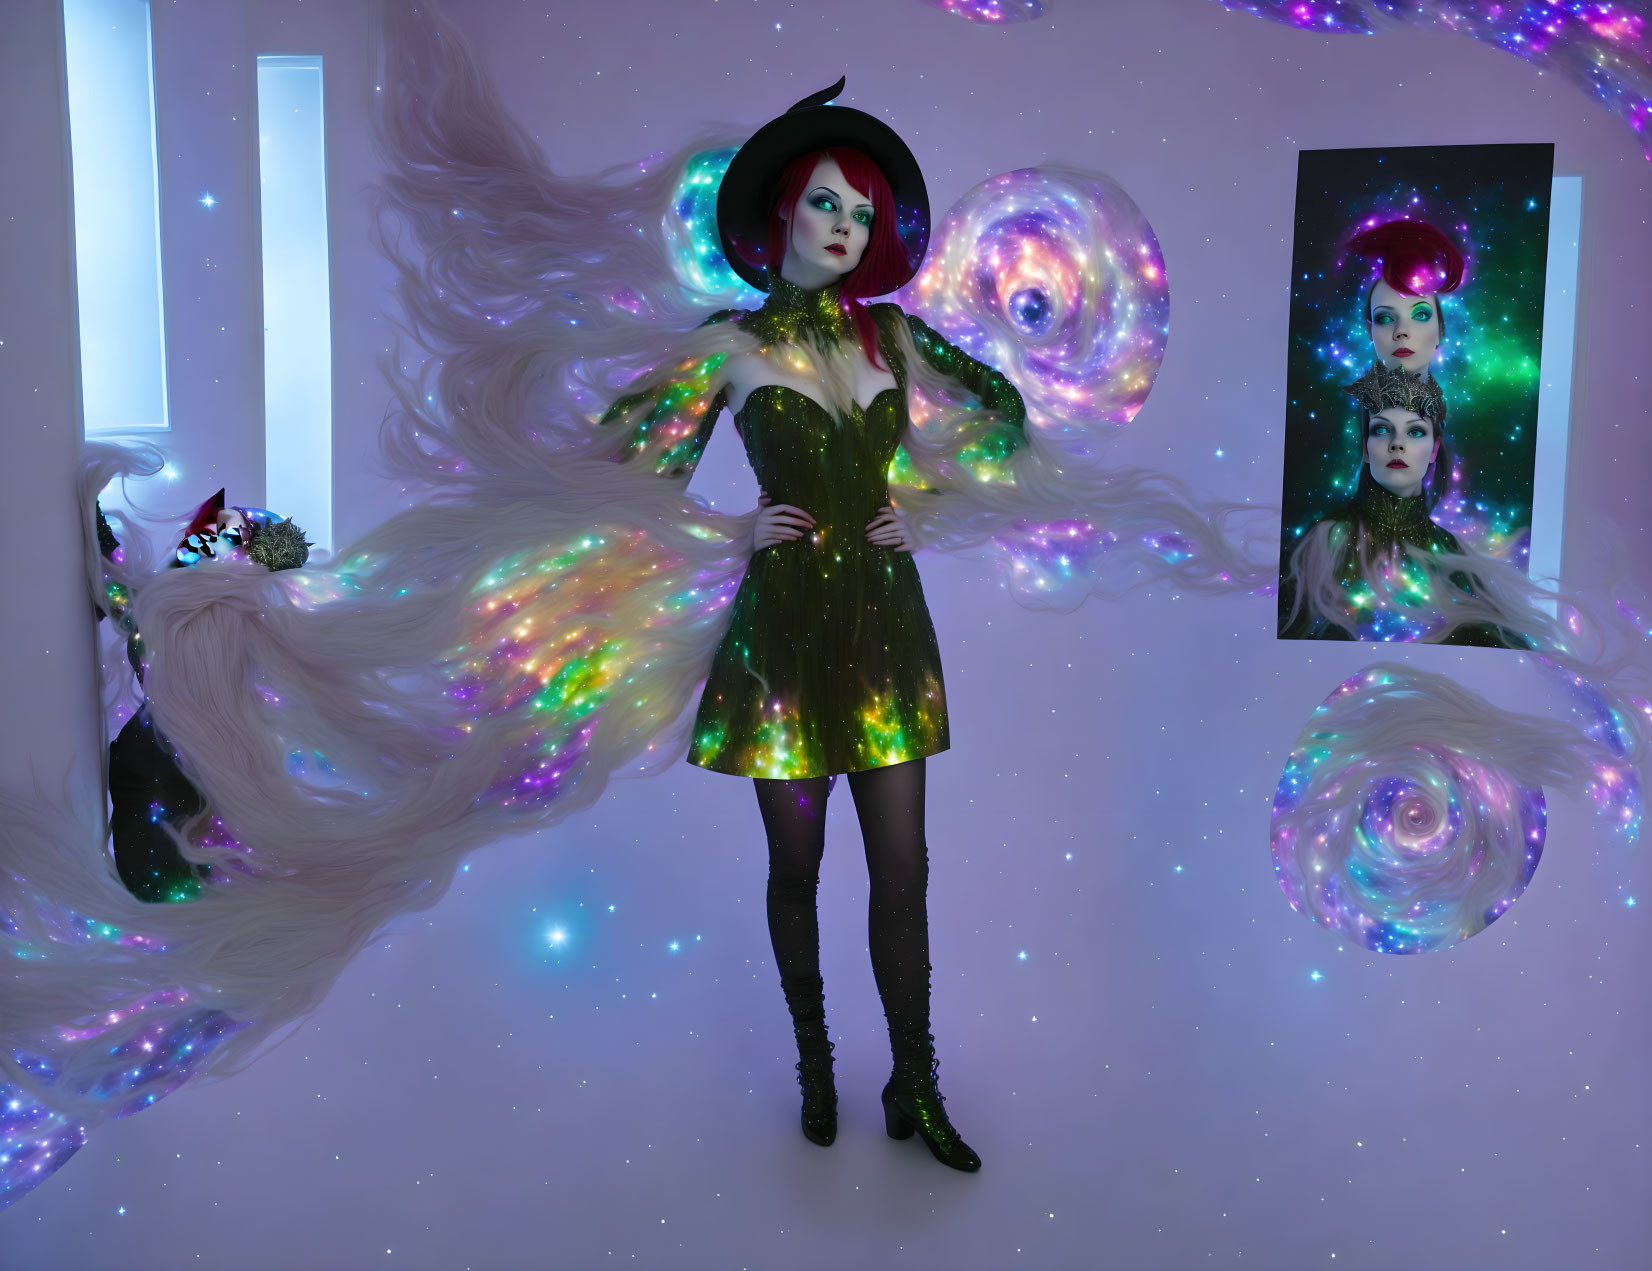 Cosmic-themed outfit and makeup in vibrant galaxy setting